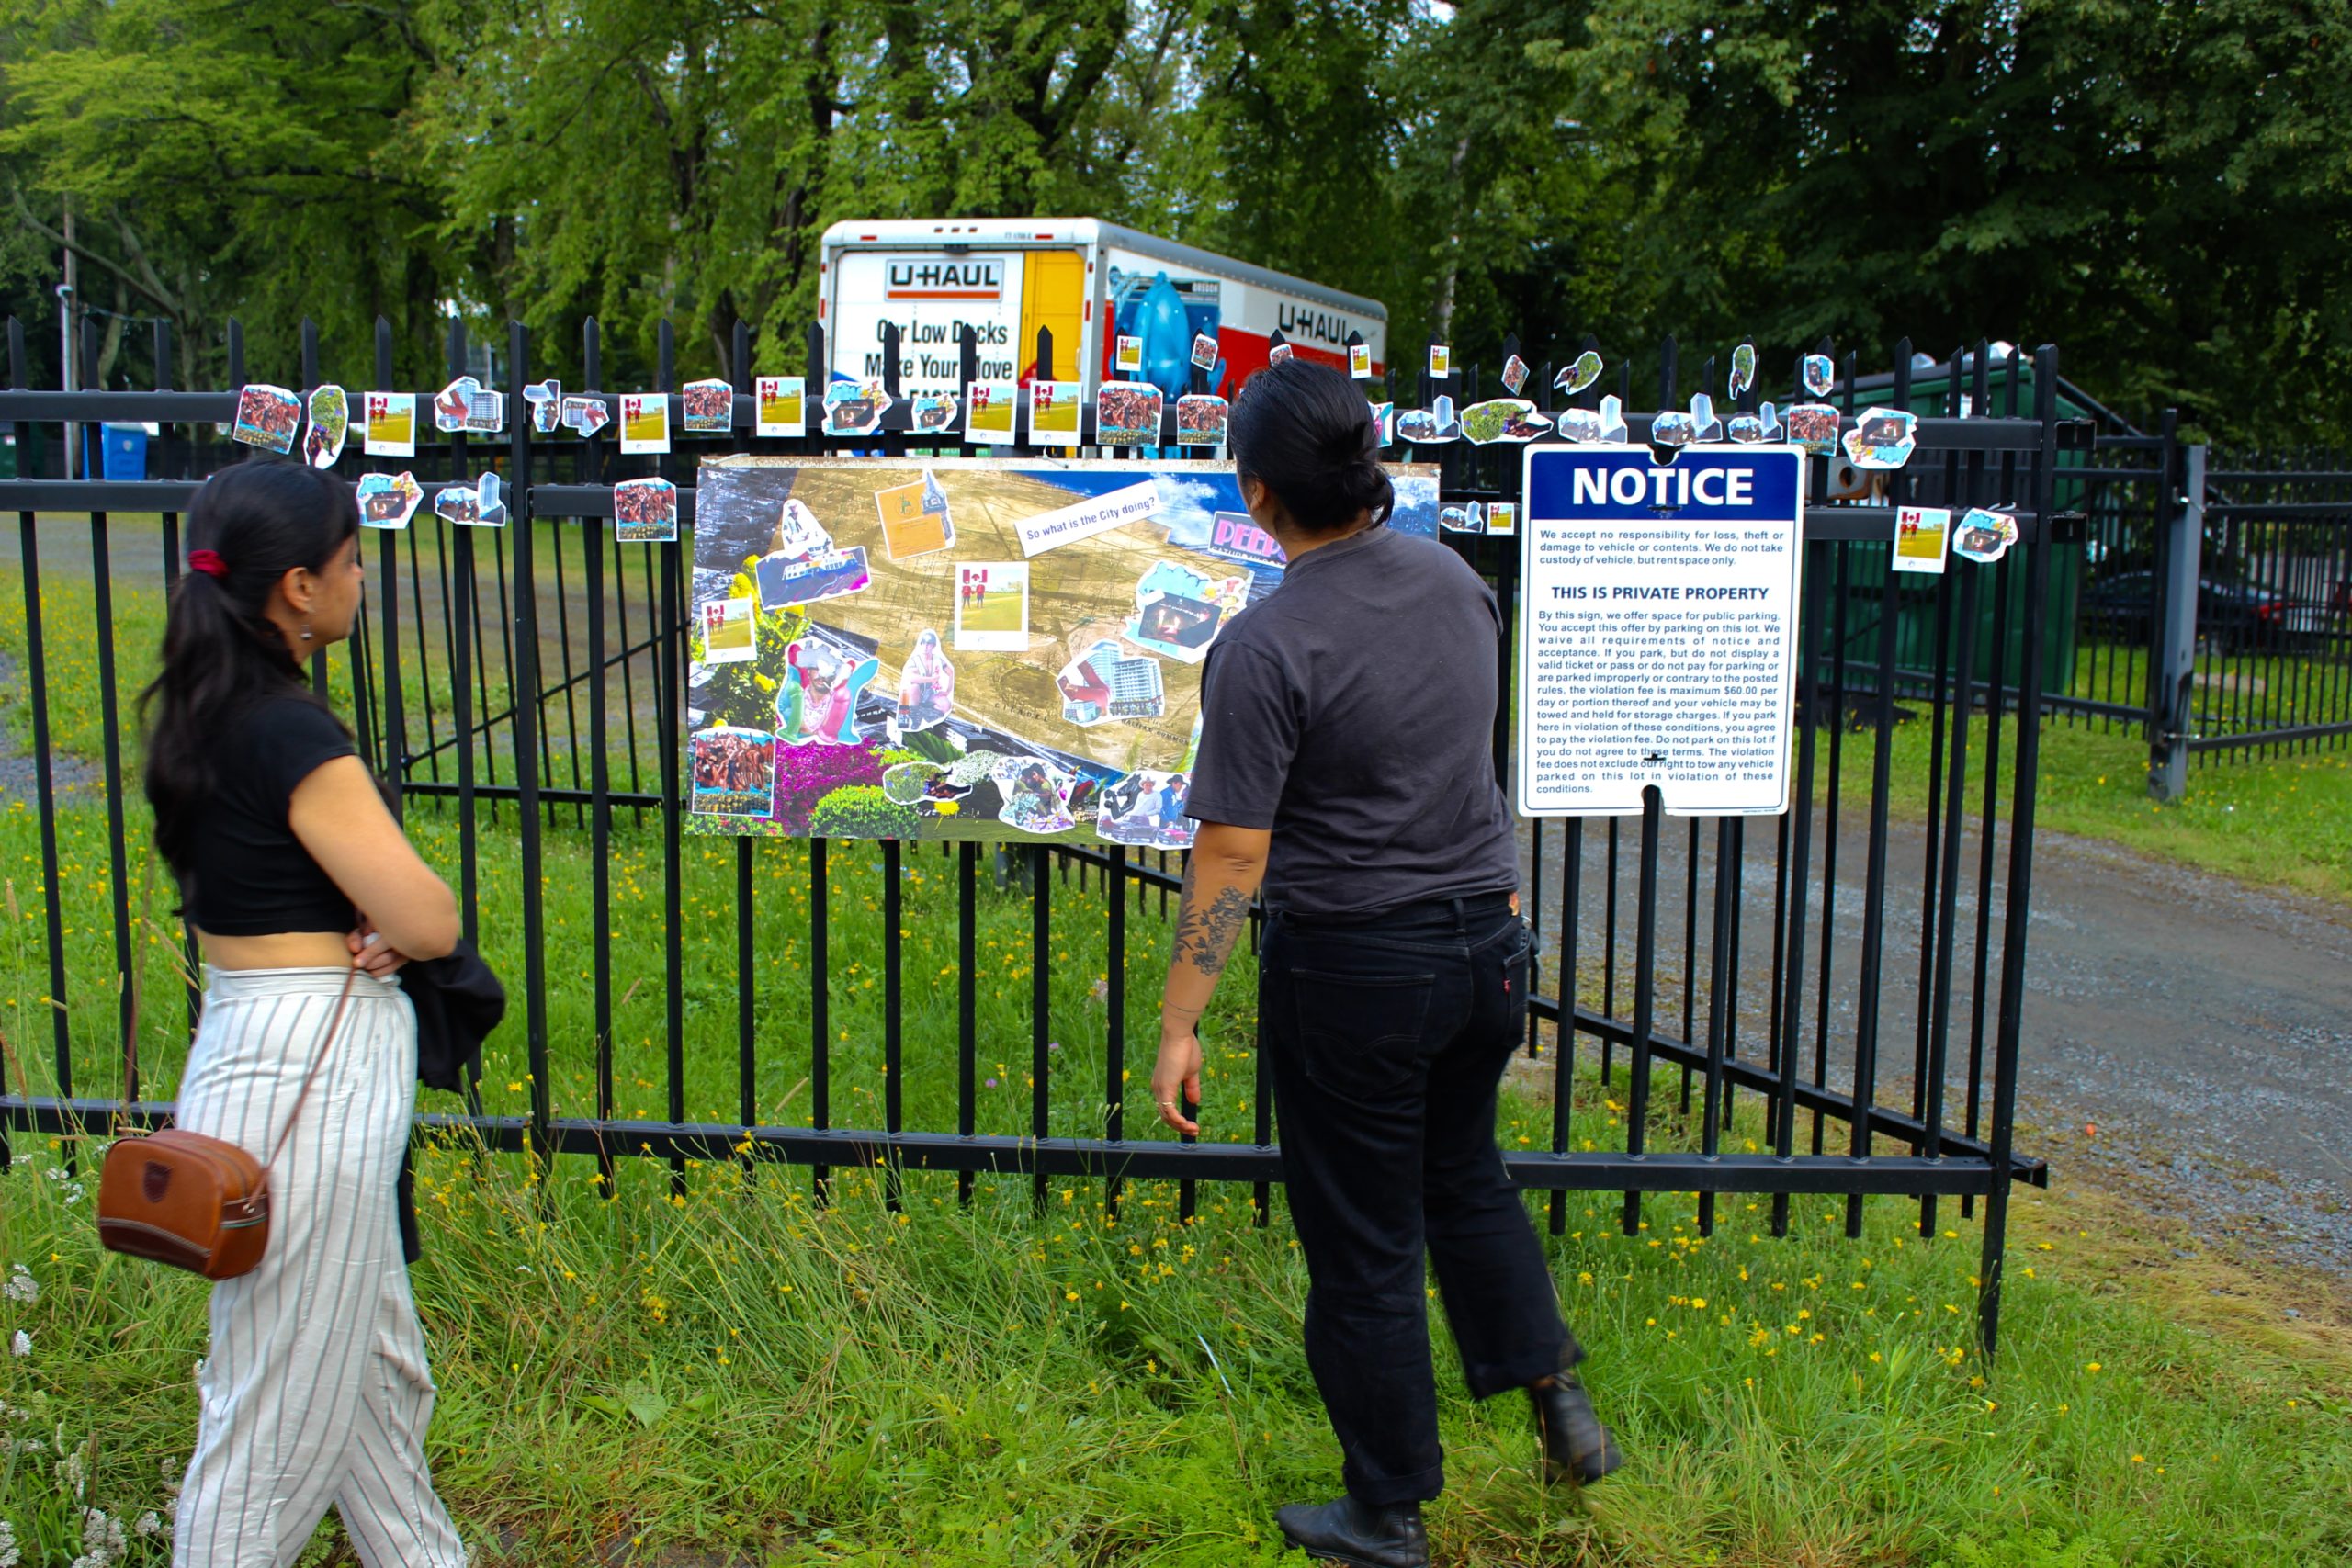 Photo of two people looking at an art installation by Arjun Lal and collaborators, it features small cut photos and collages along a black metal fence, it also has one large poster attached with collaged imagery of various colours. The fence is on a grassy area of a part, with a pathway and trees in the background.